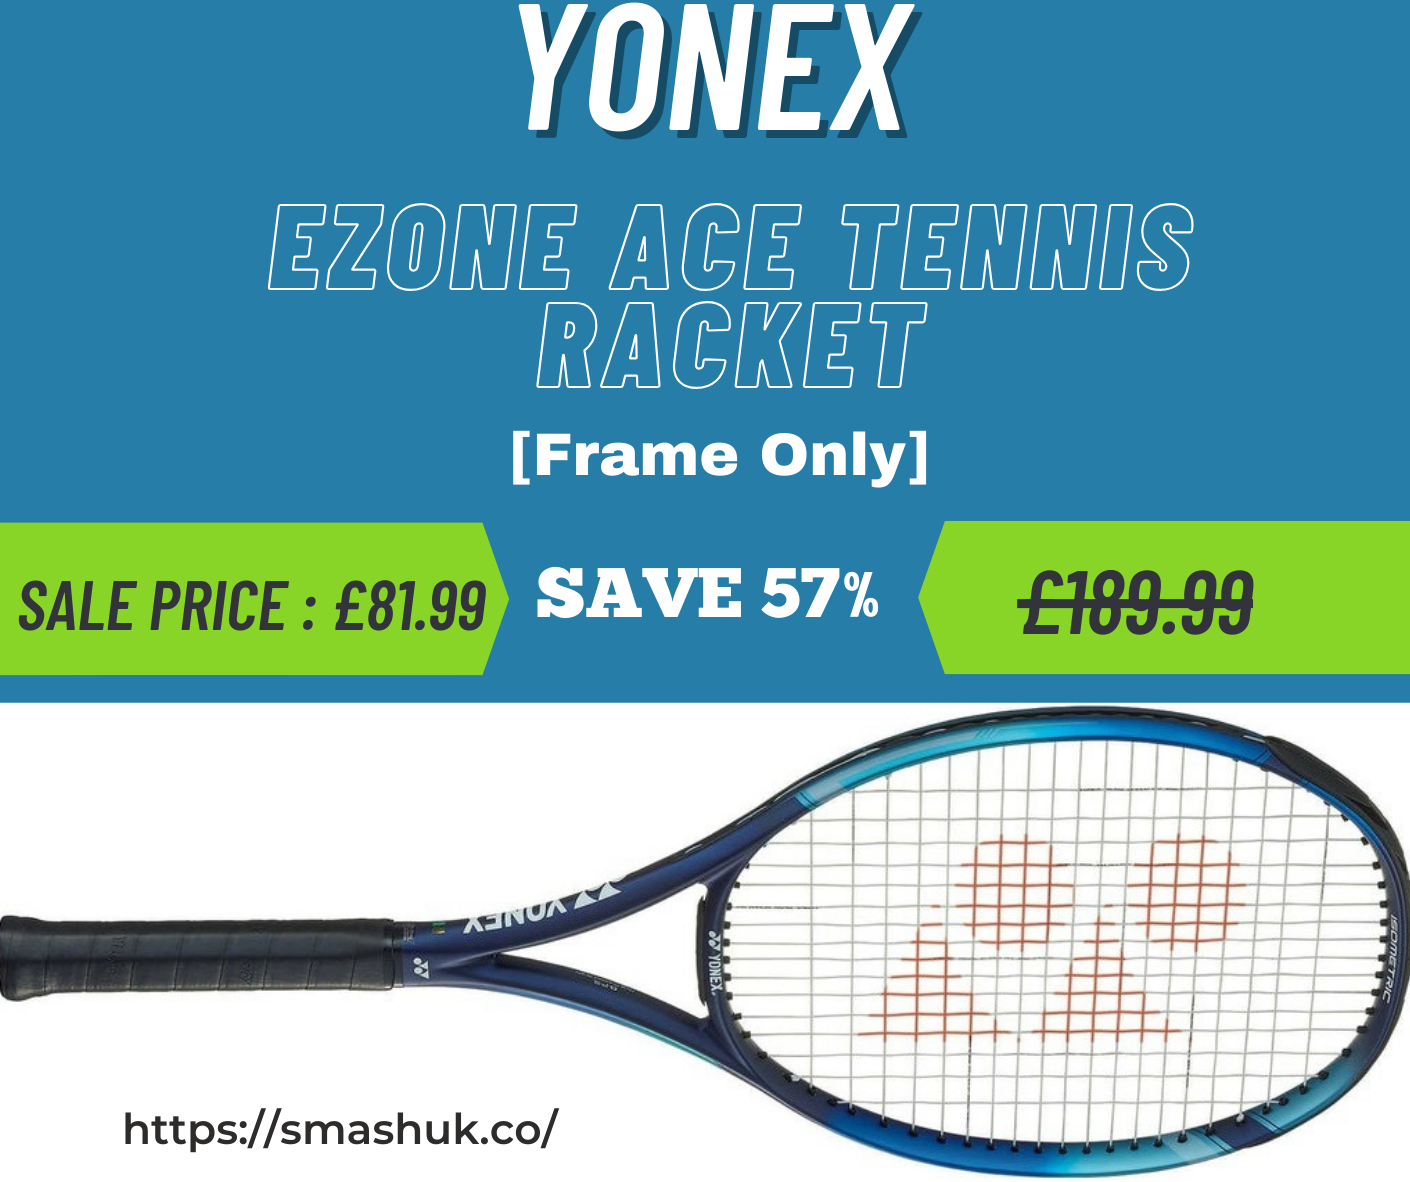 Yonex EZONE Ace Tennis Racket - Features, Price, & Offers